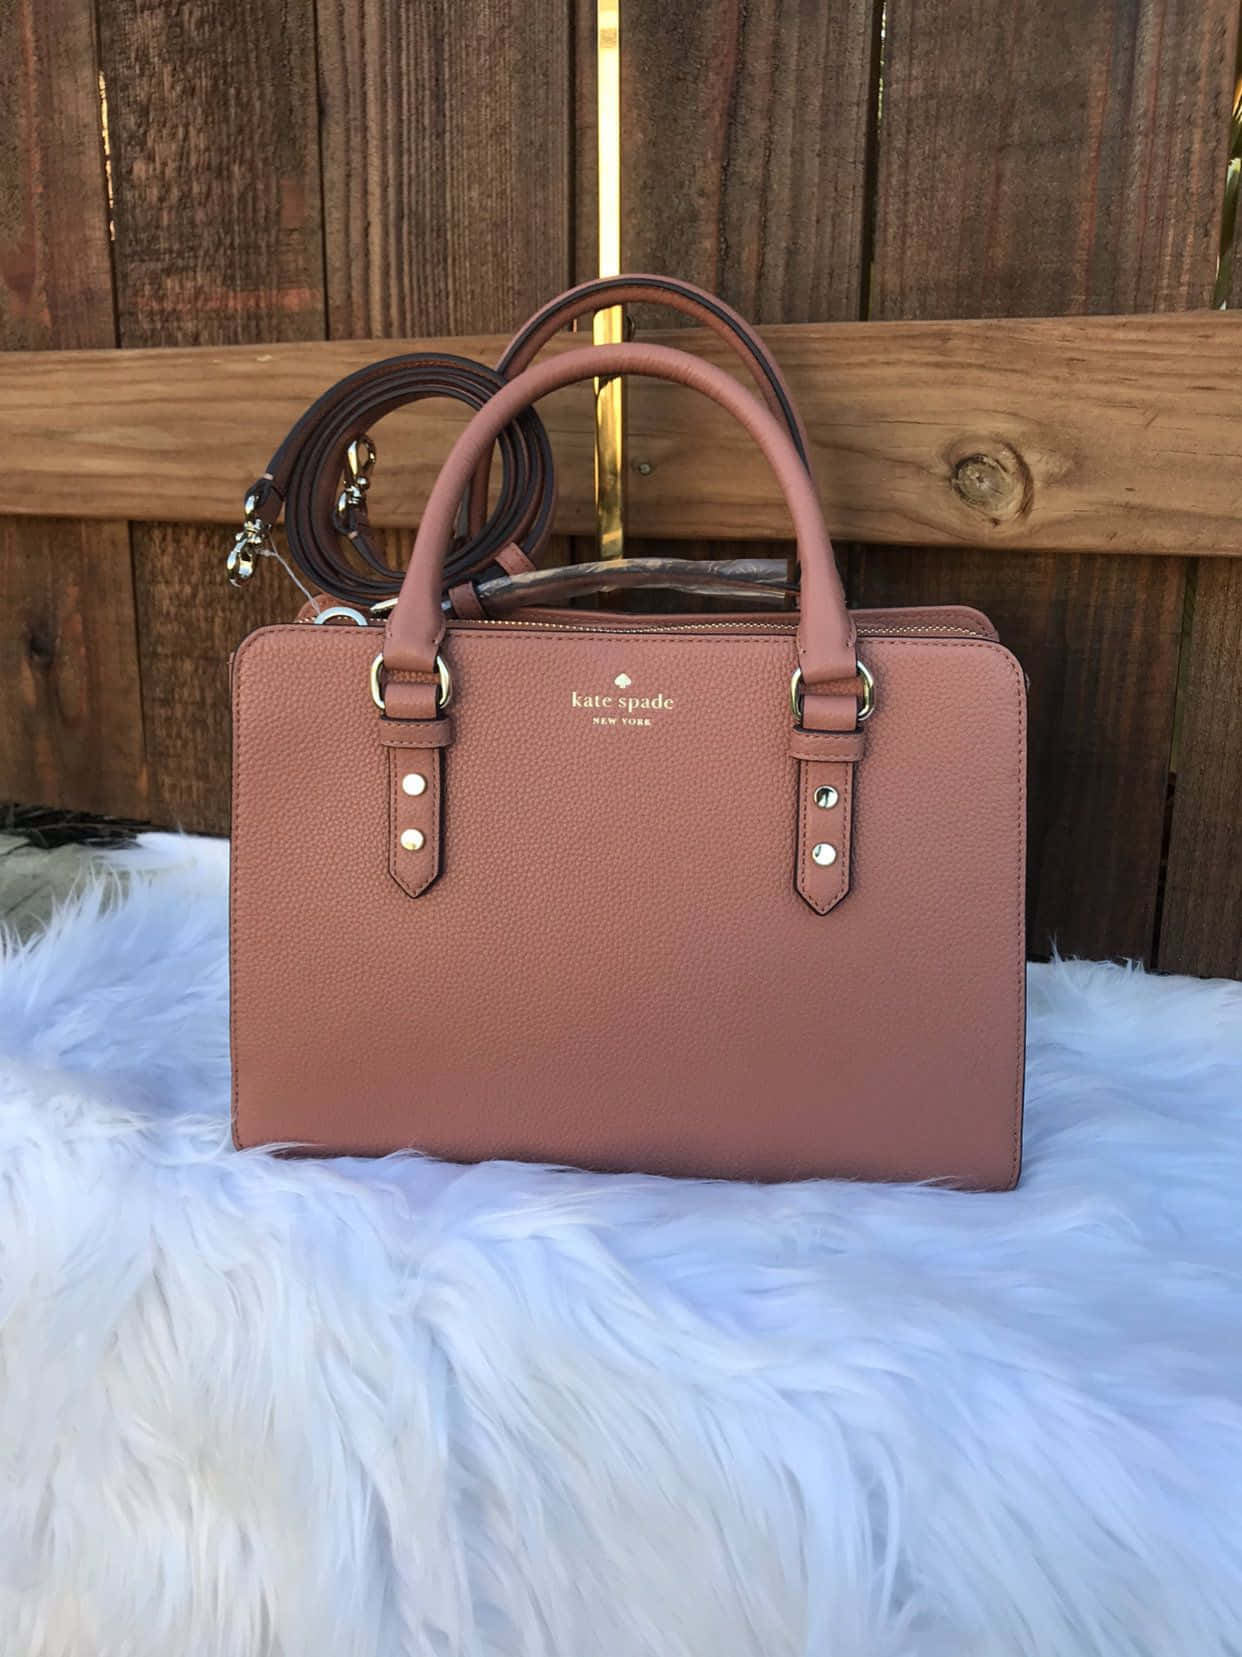 Shine bright with Kate Spade.